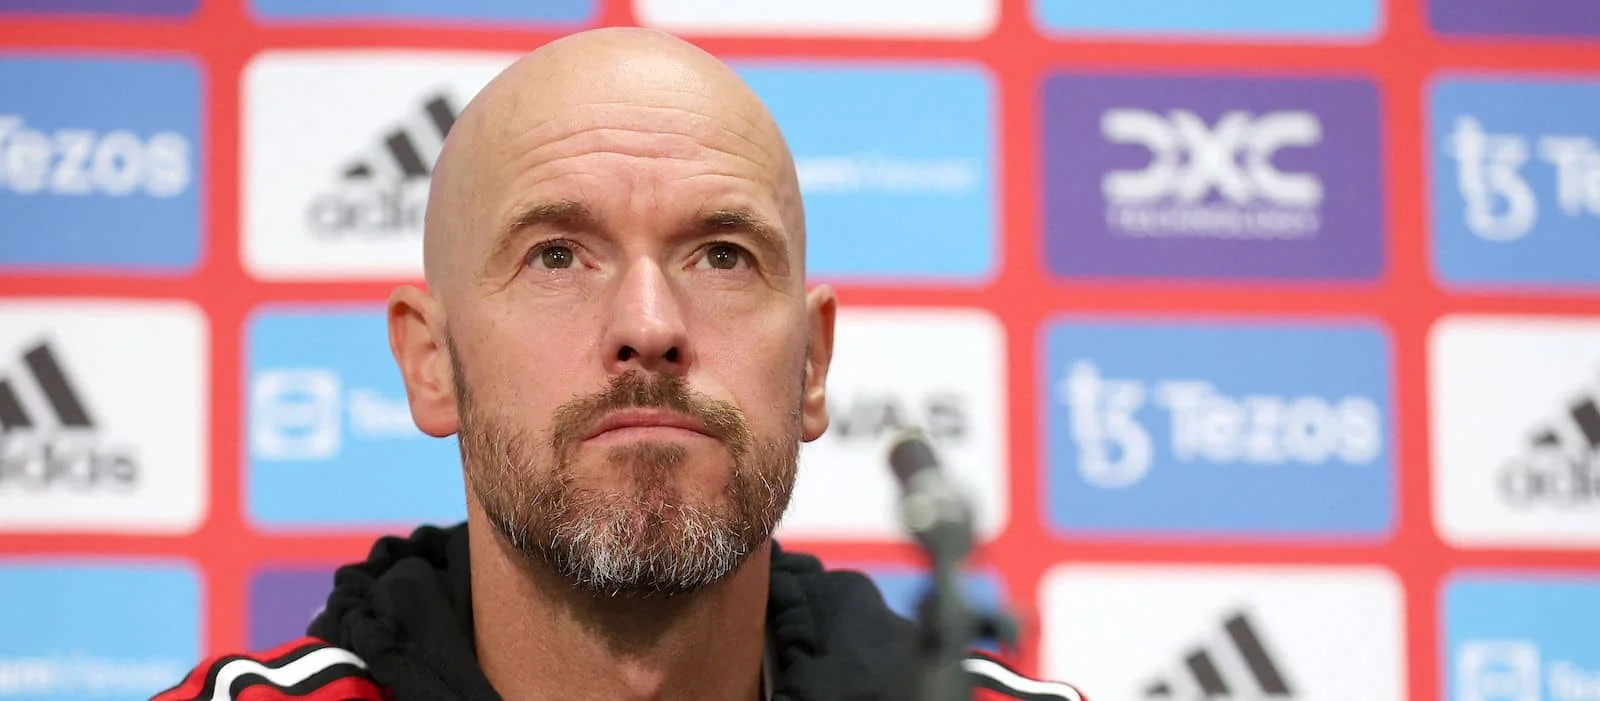 Erik ten Hag's Vision Beyond Defeat: A Closer Look at Manchester United's Resilience